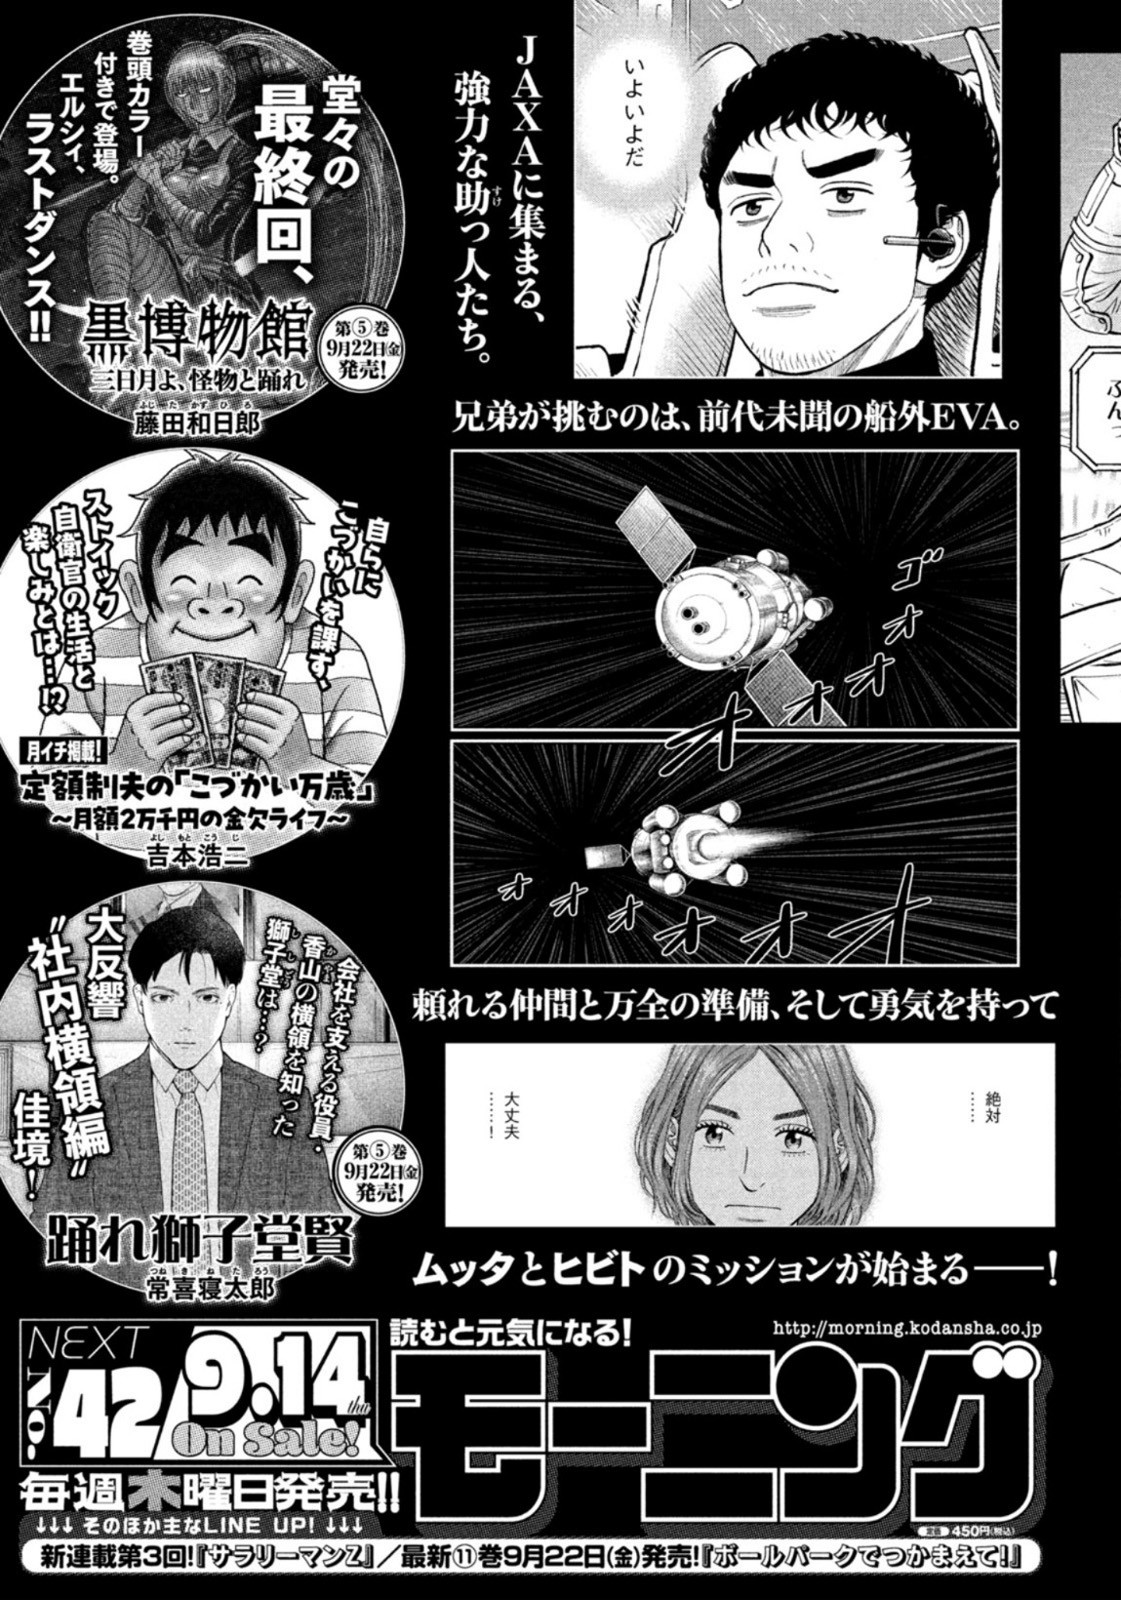 Weekly Morning - 週刊モーニング - Chapter 2023-41 - Page 452